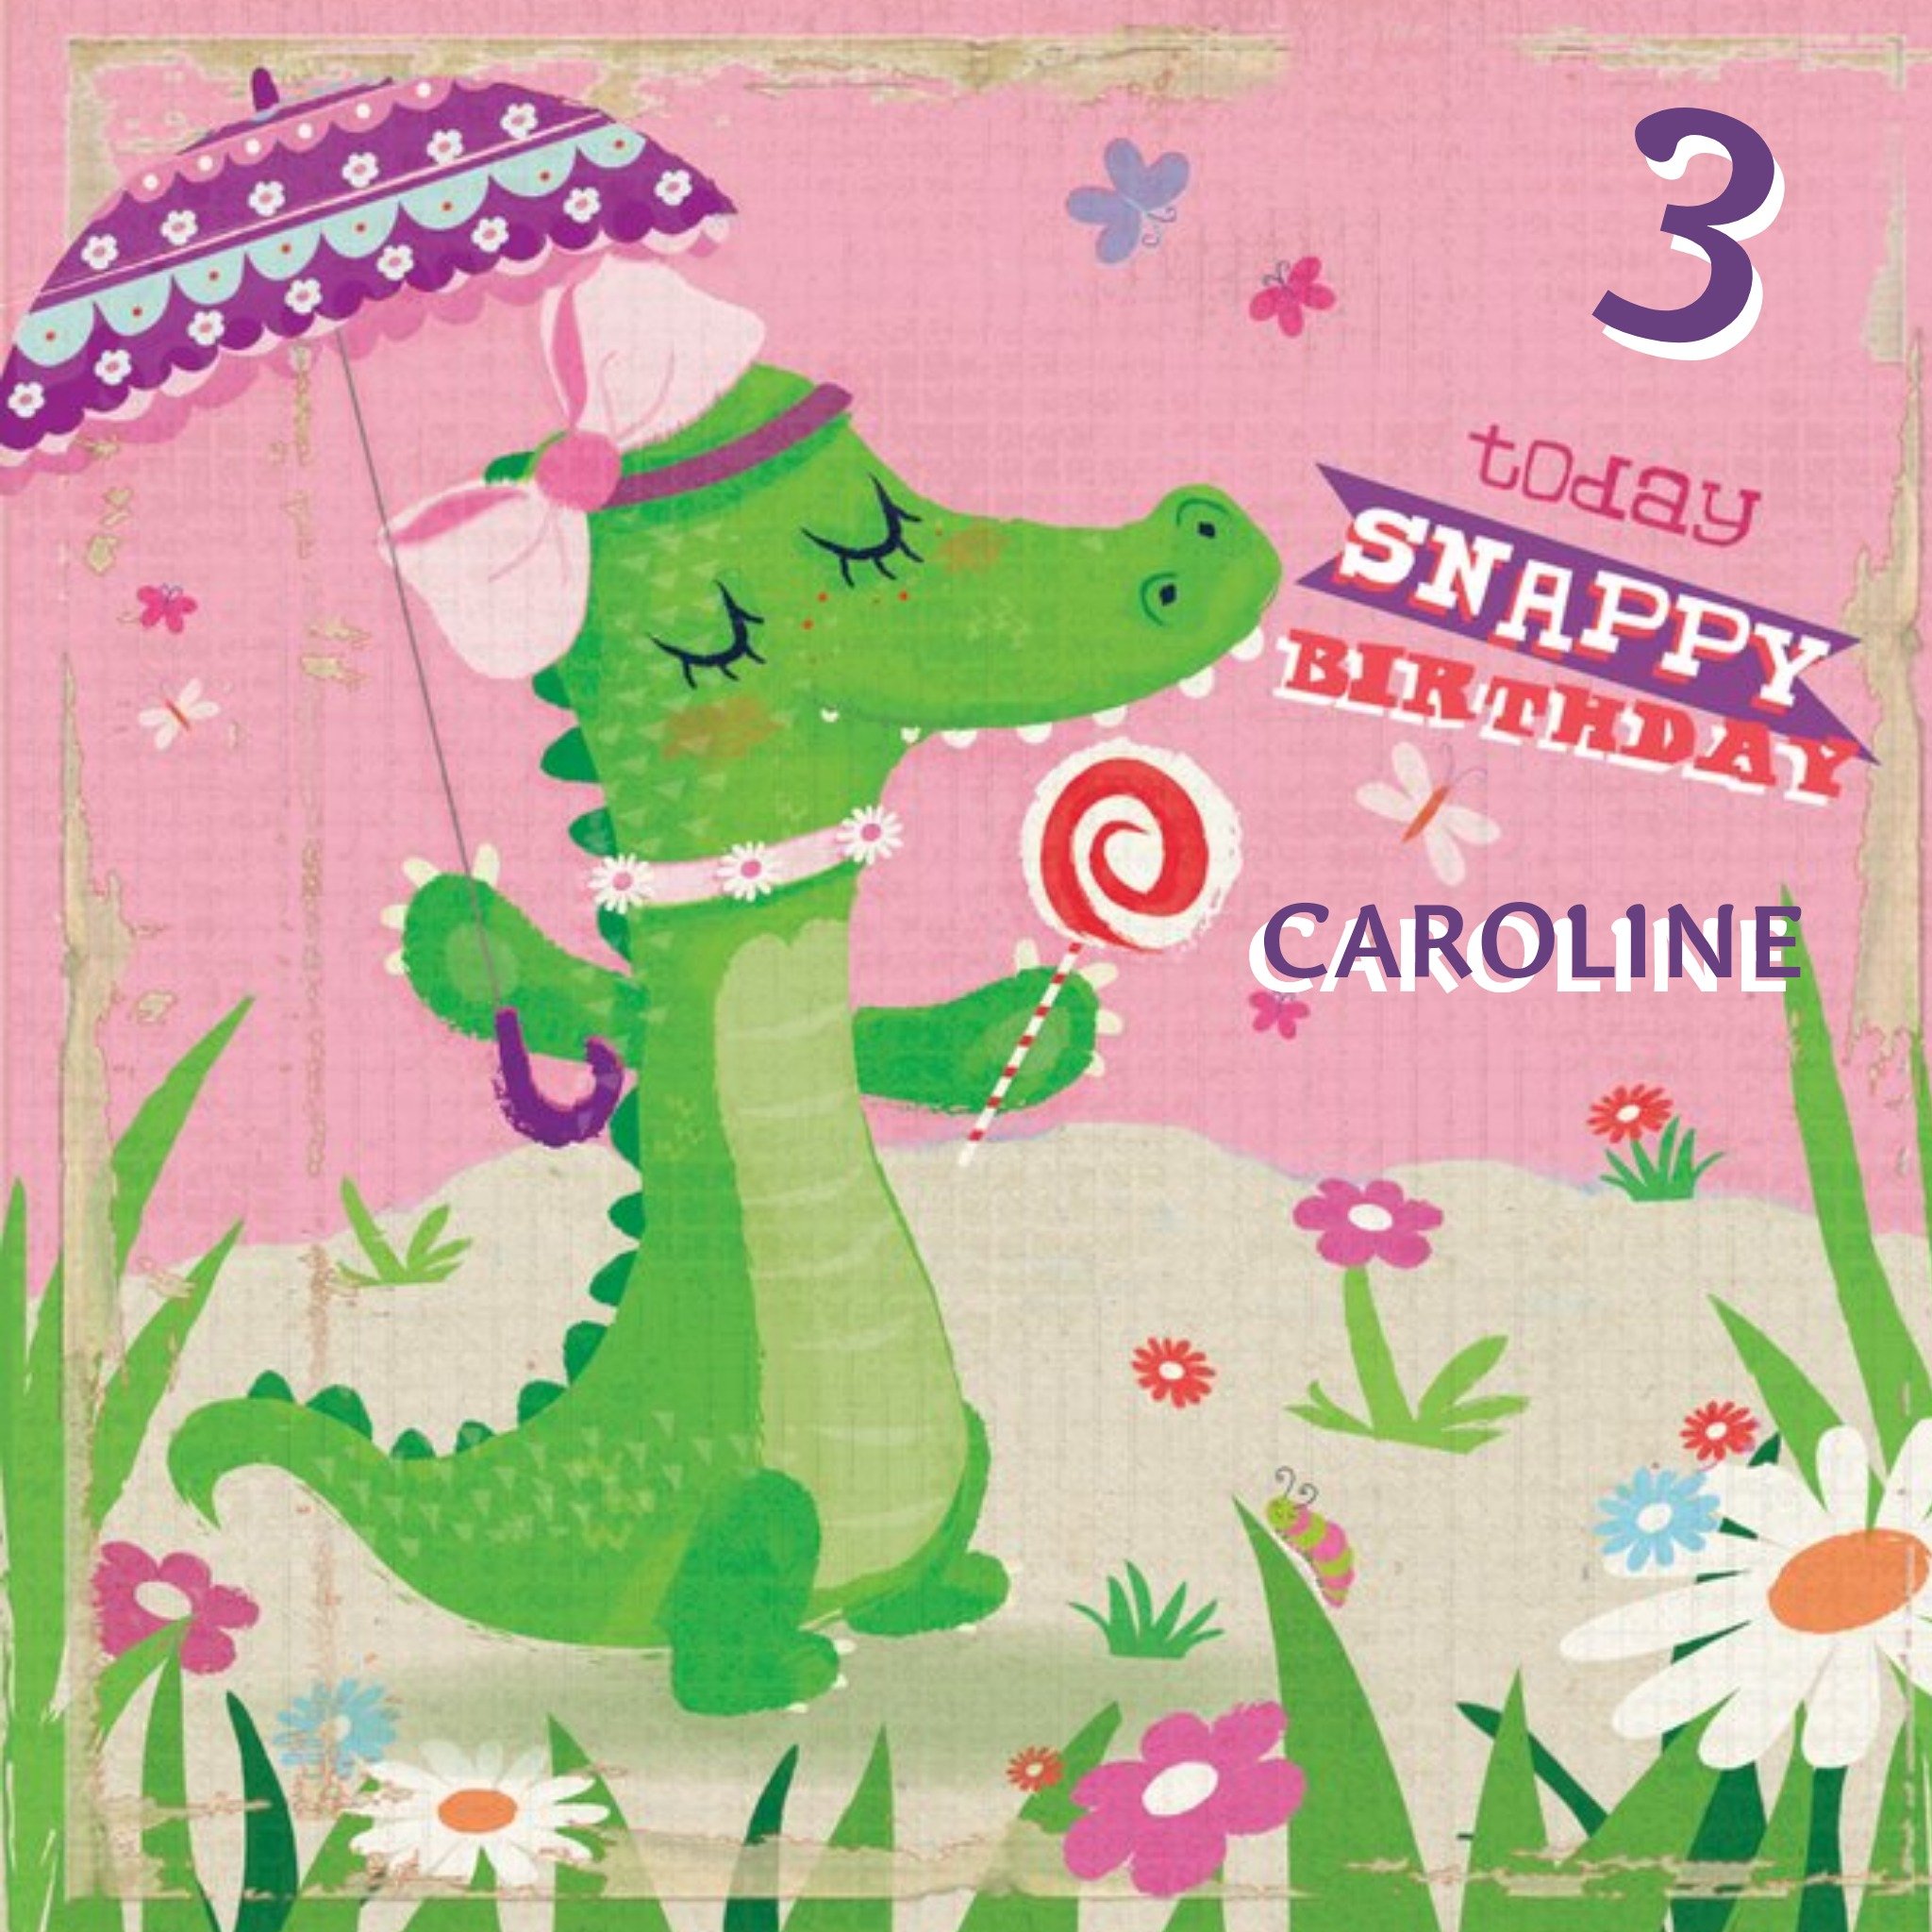 Moonpig Snappy Birthday Personalised 3rd Birthday Card, Square